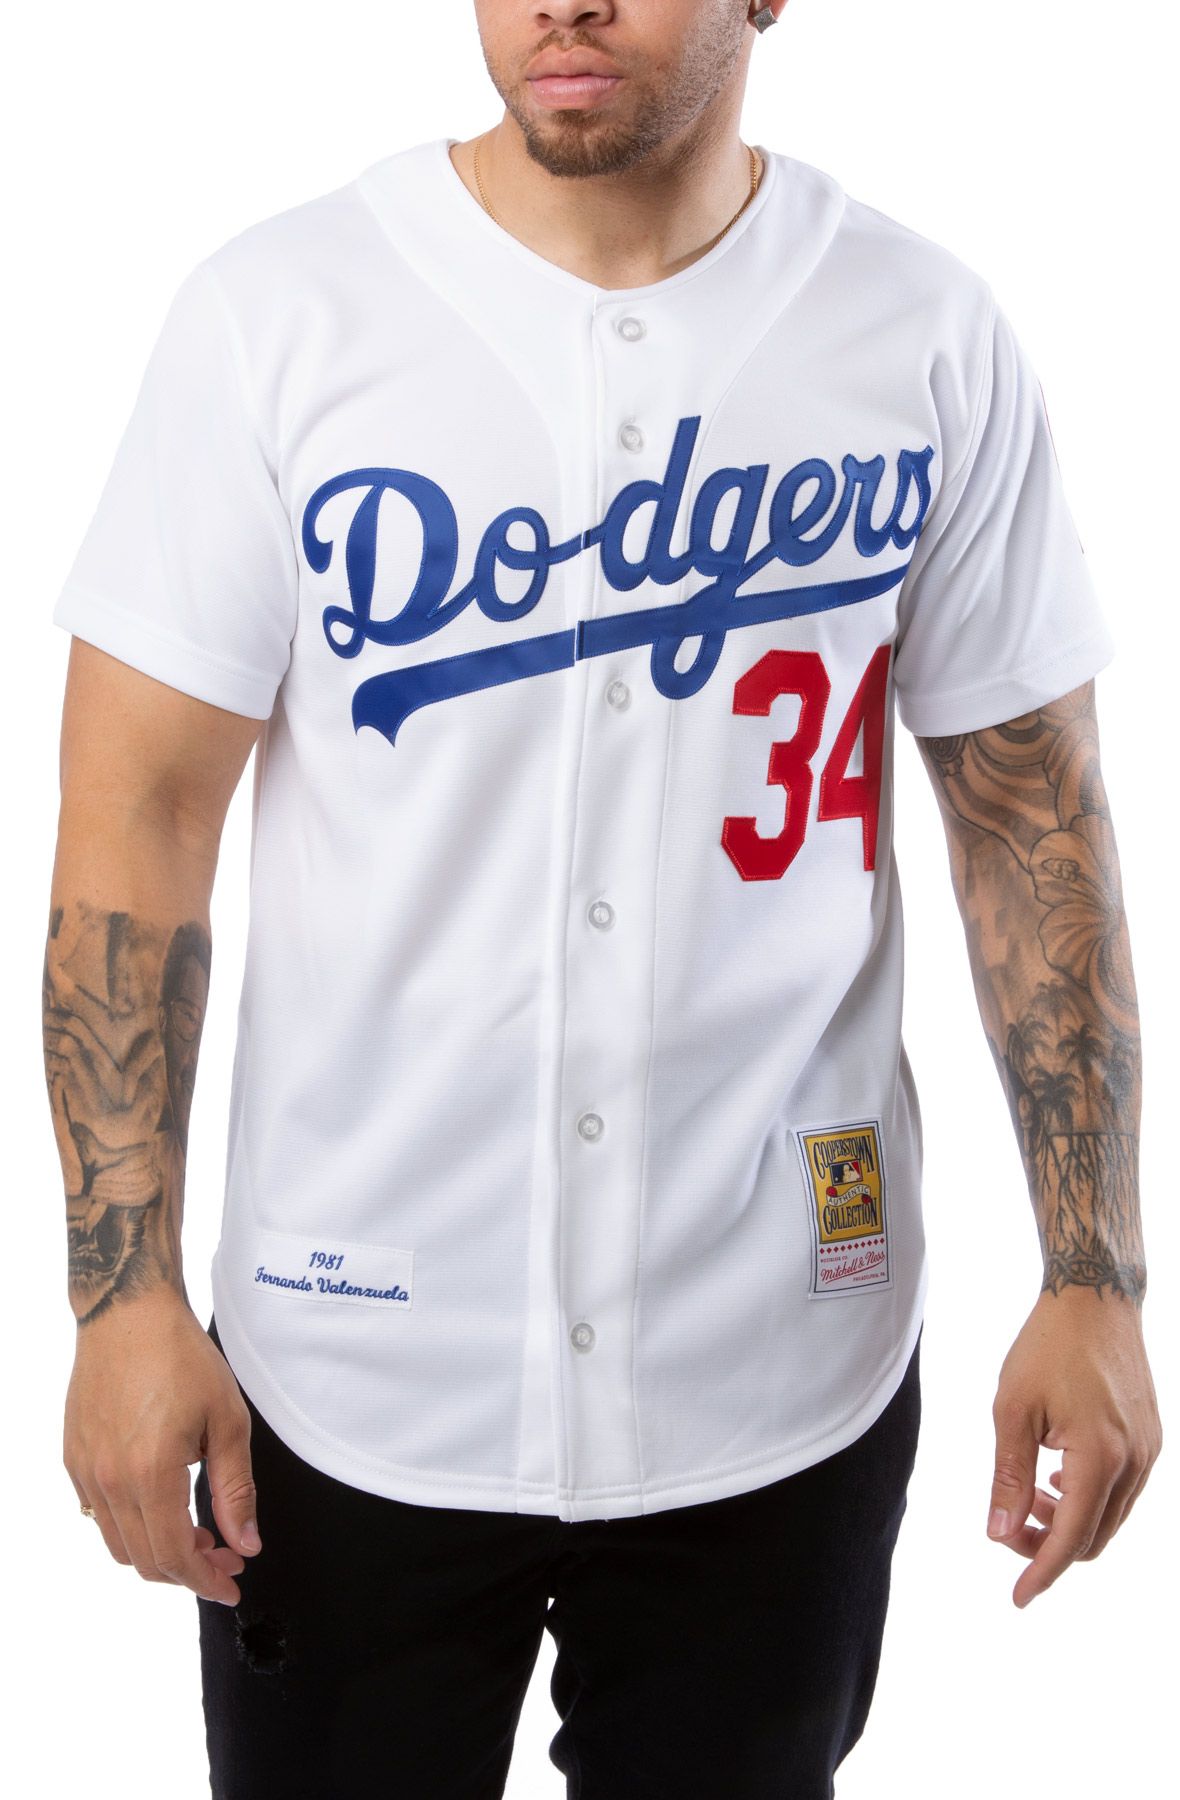 dodgers jersey official